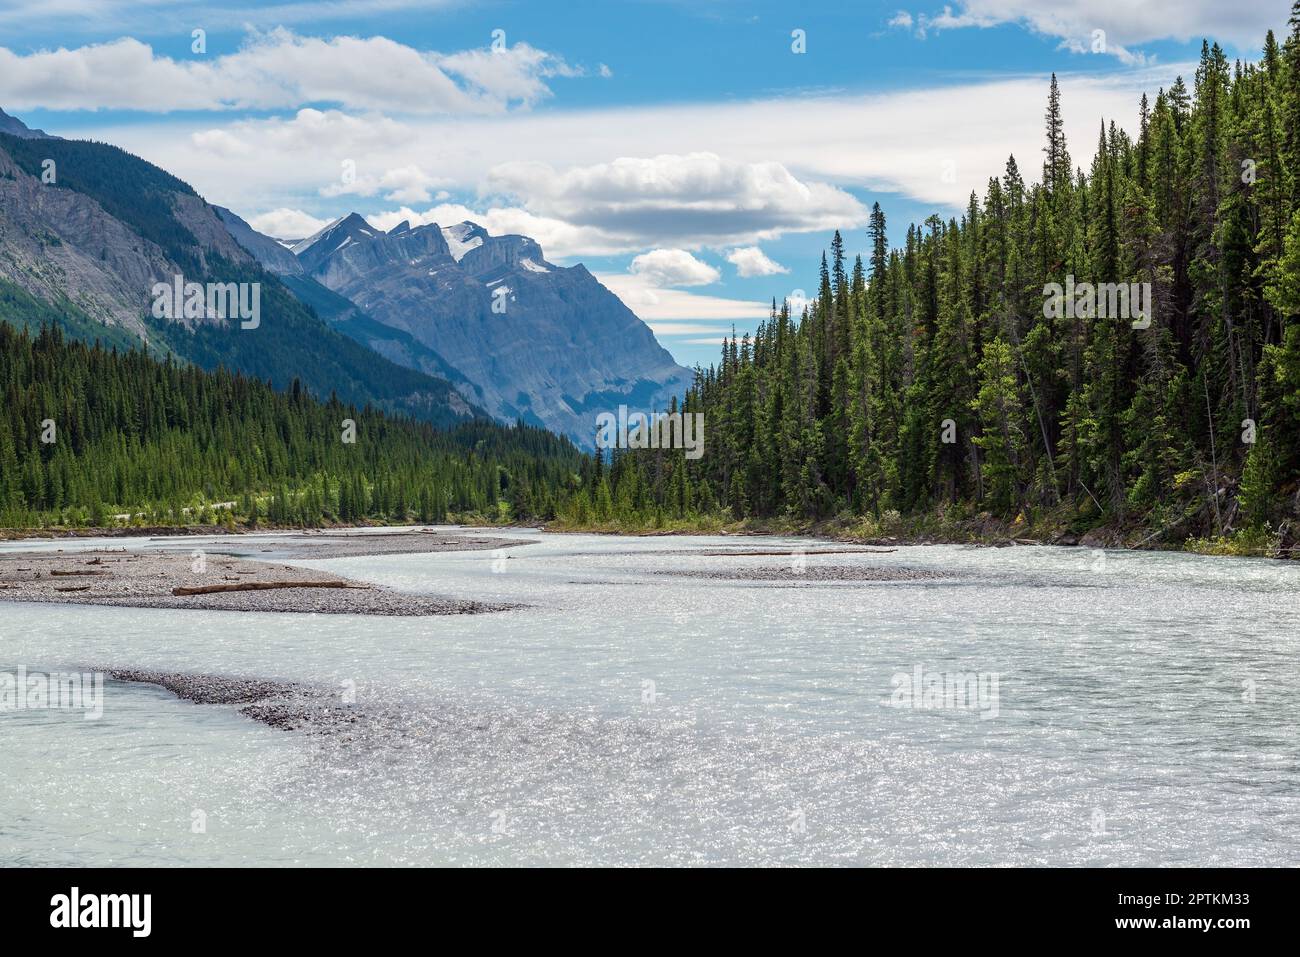 Athabasca river with pine tree forest and Rocky Mountains in summer, Jasper national park, Canada. Stock Photo